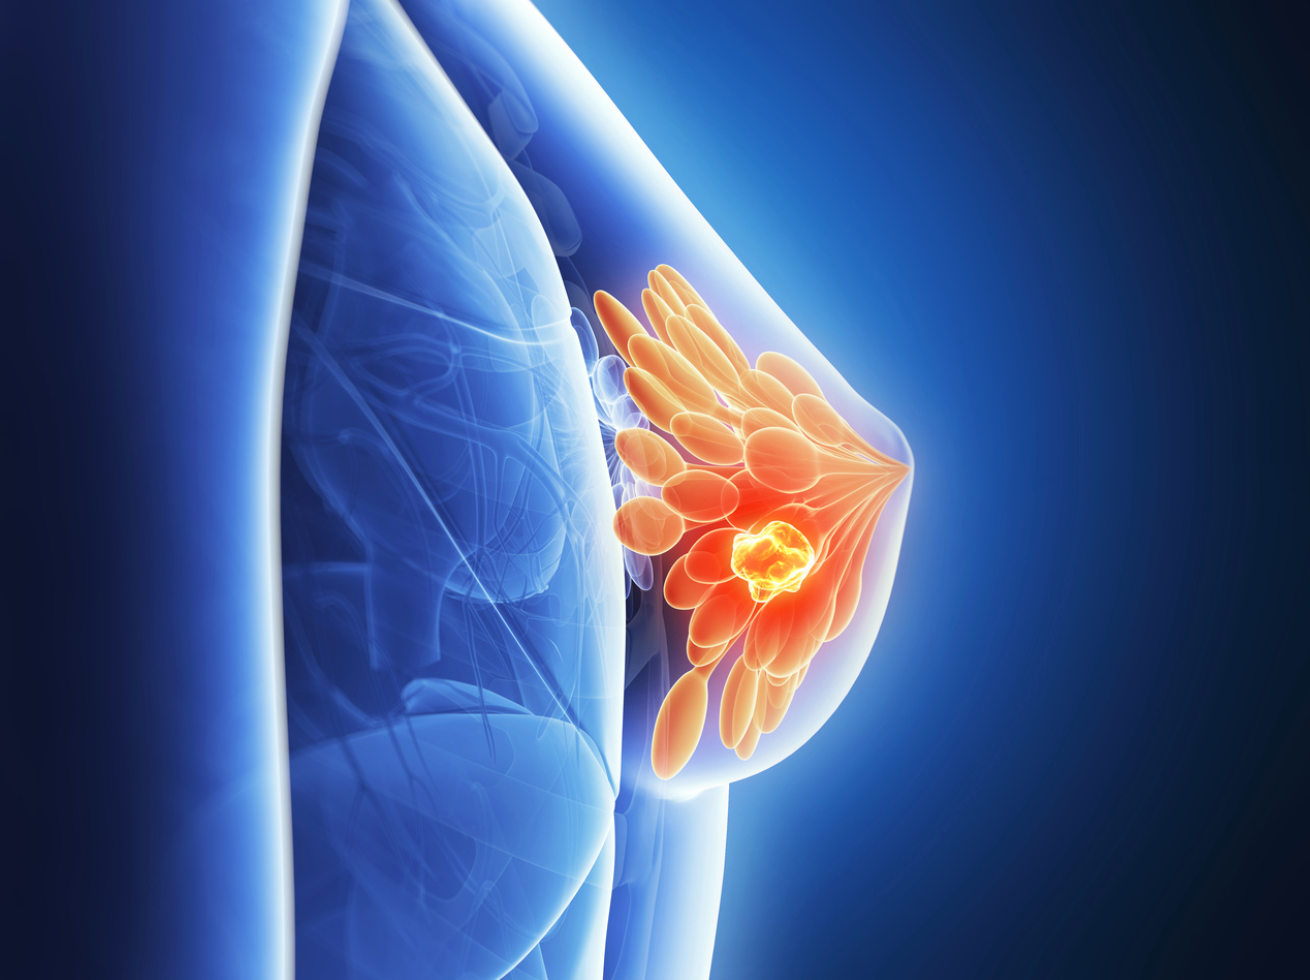 Study Shows Progress in Breast Cancer Survivorship Over 15 Years